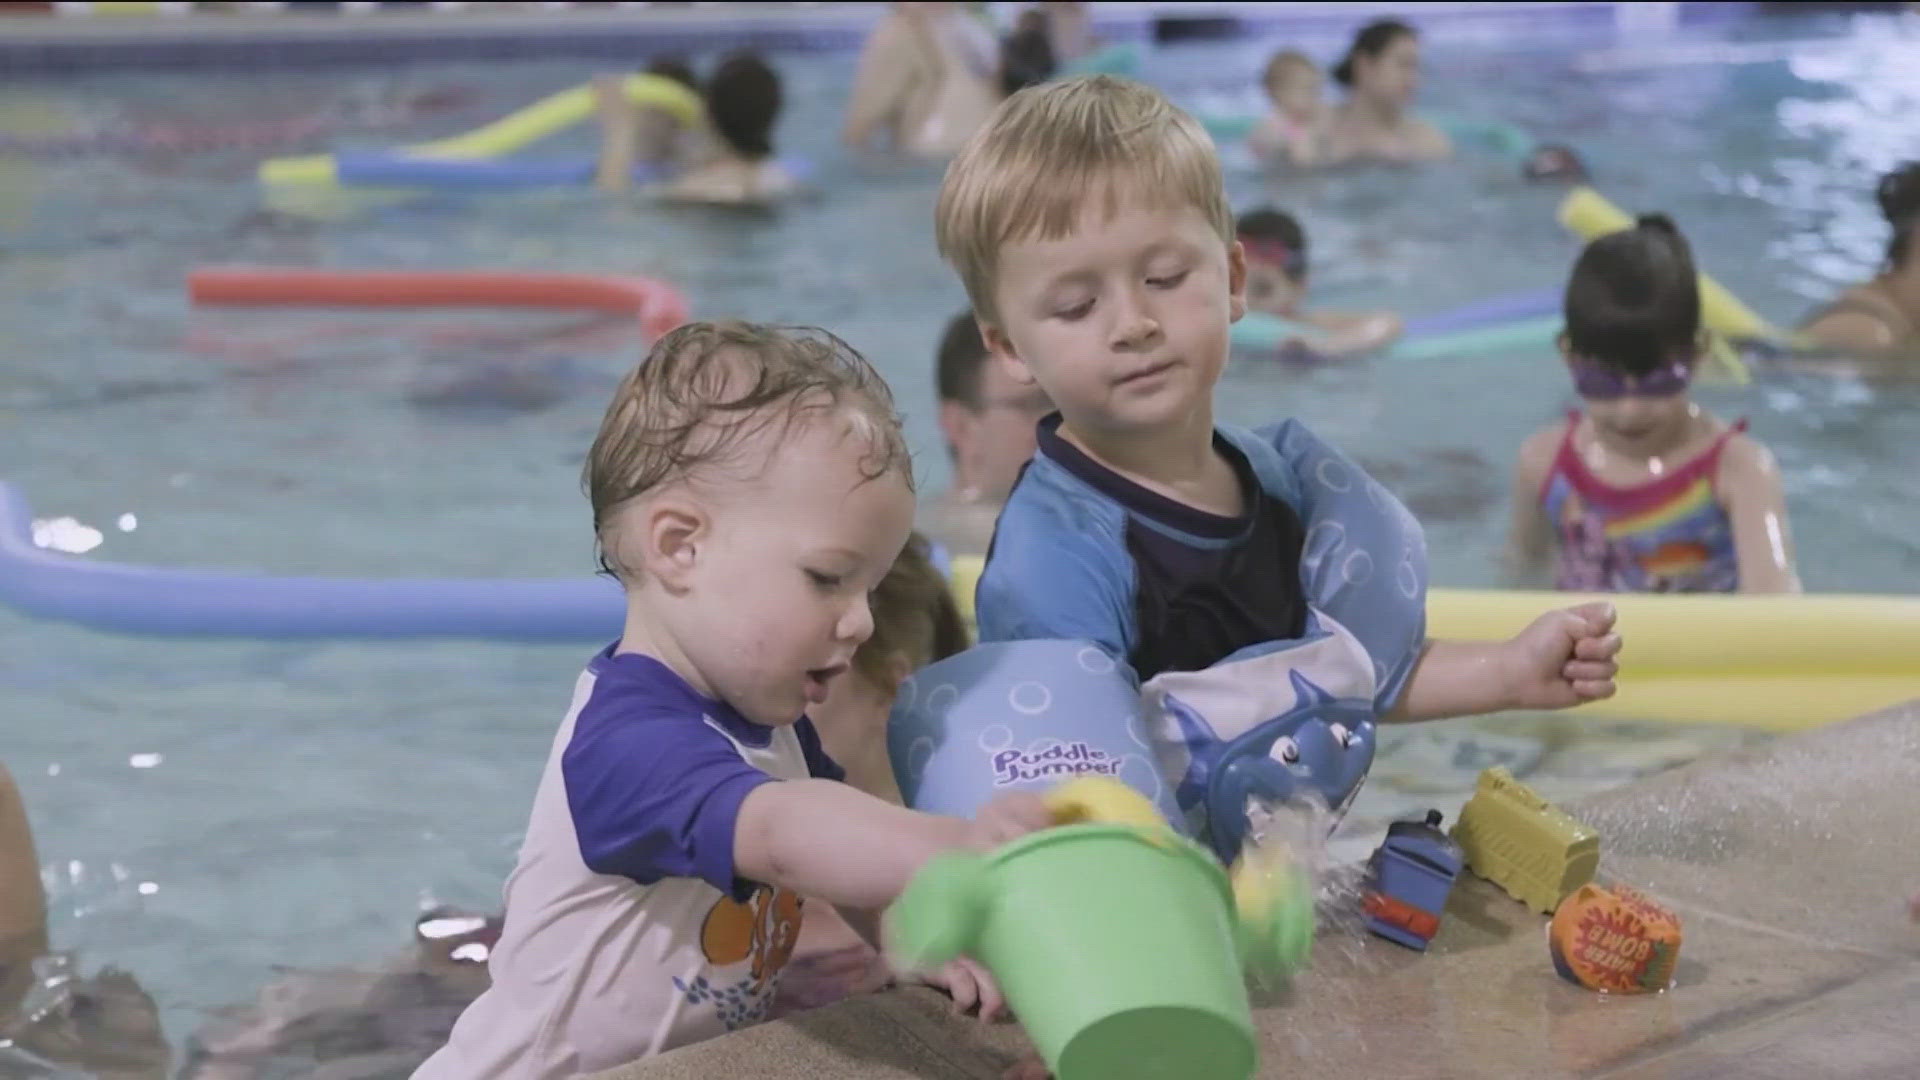 With drowning rates increasing, it's important to know how you can keep children safe in the water. Consumer Reports shares tips you should know.